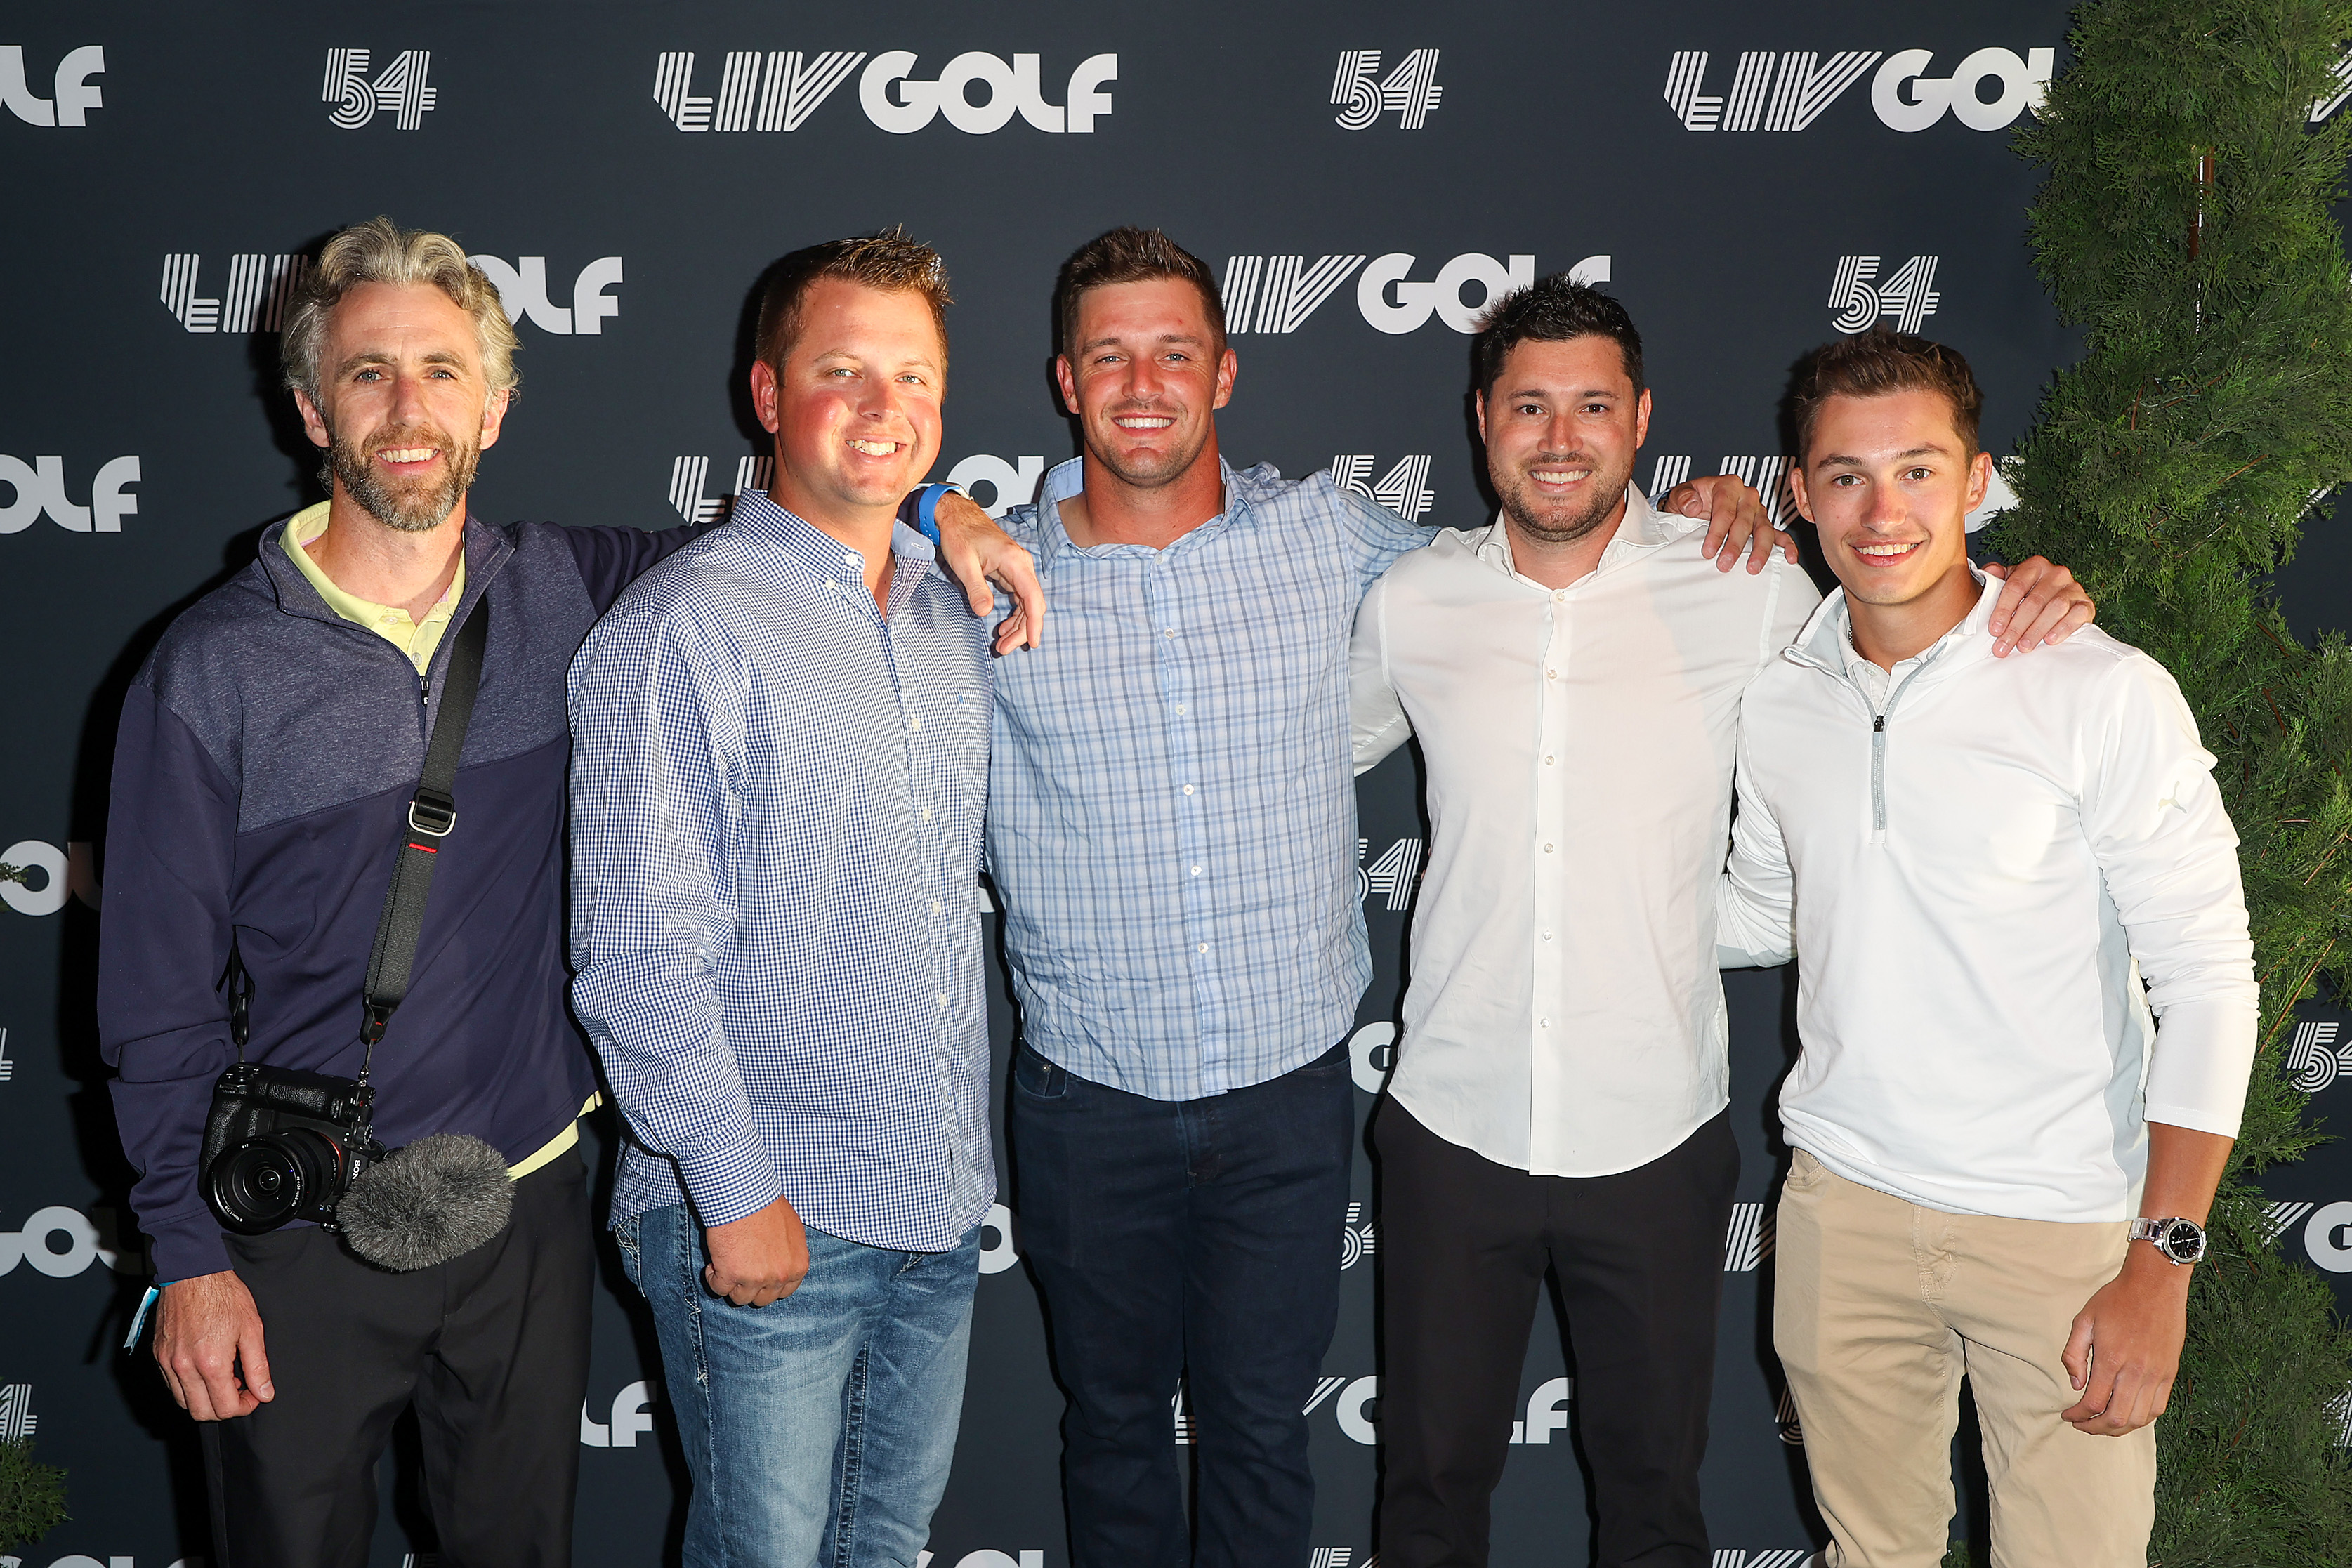 Bryson DeChambeau of Crushers GC smiles with guests during the LIV Golf Invitational - Portland Welcome Party at Redd on June 28, 2022 in Portland, Oregon.